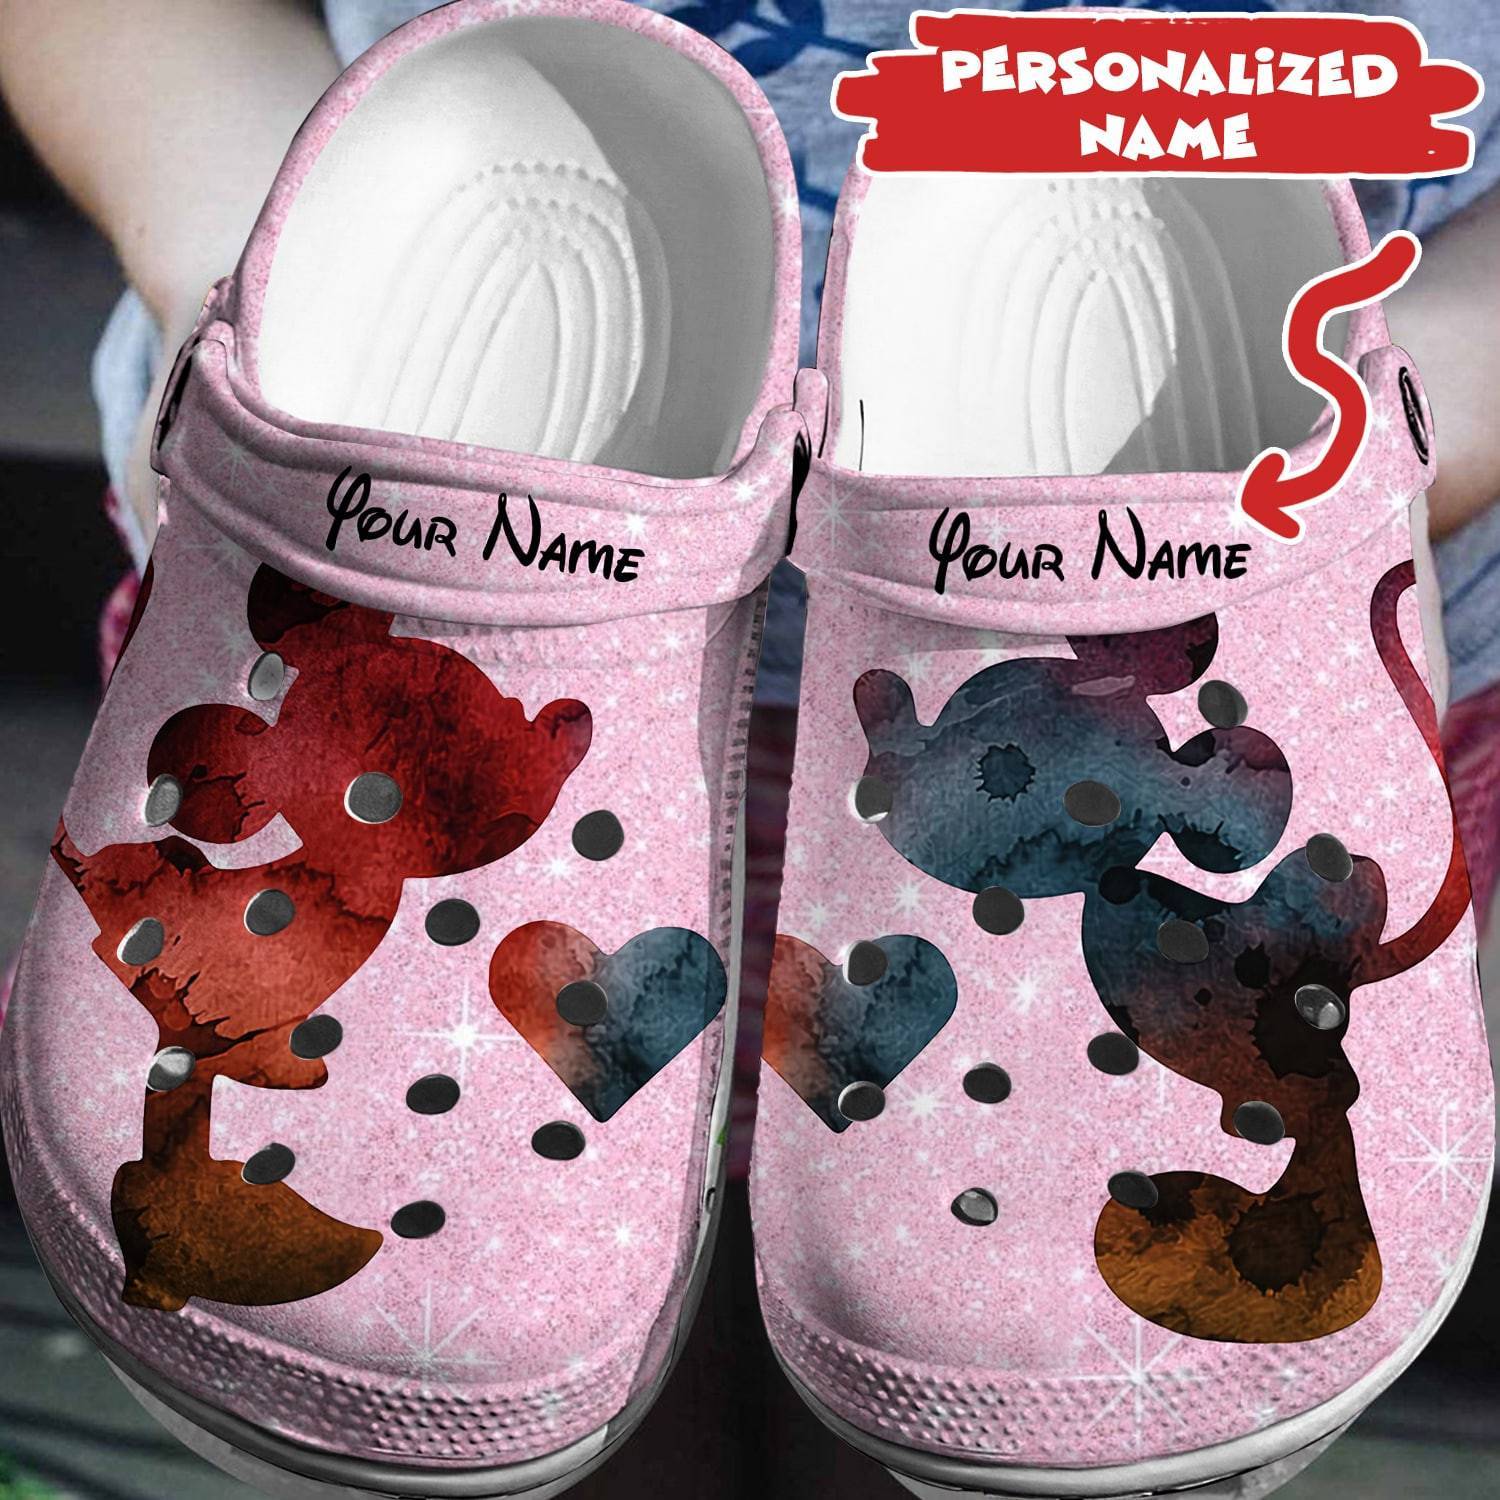 Customized Disney Adventure: Personalized Mickey Minnie Crocs 3D Clog Shoes